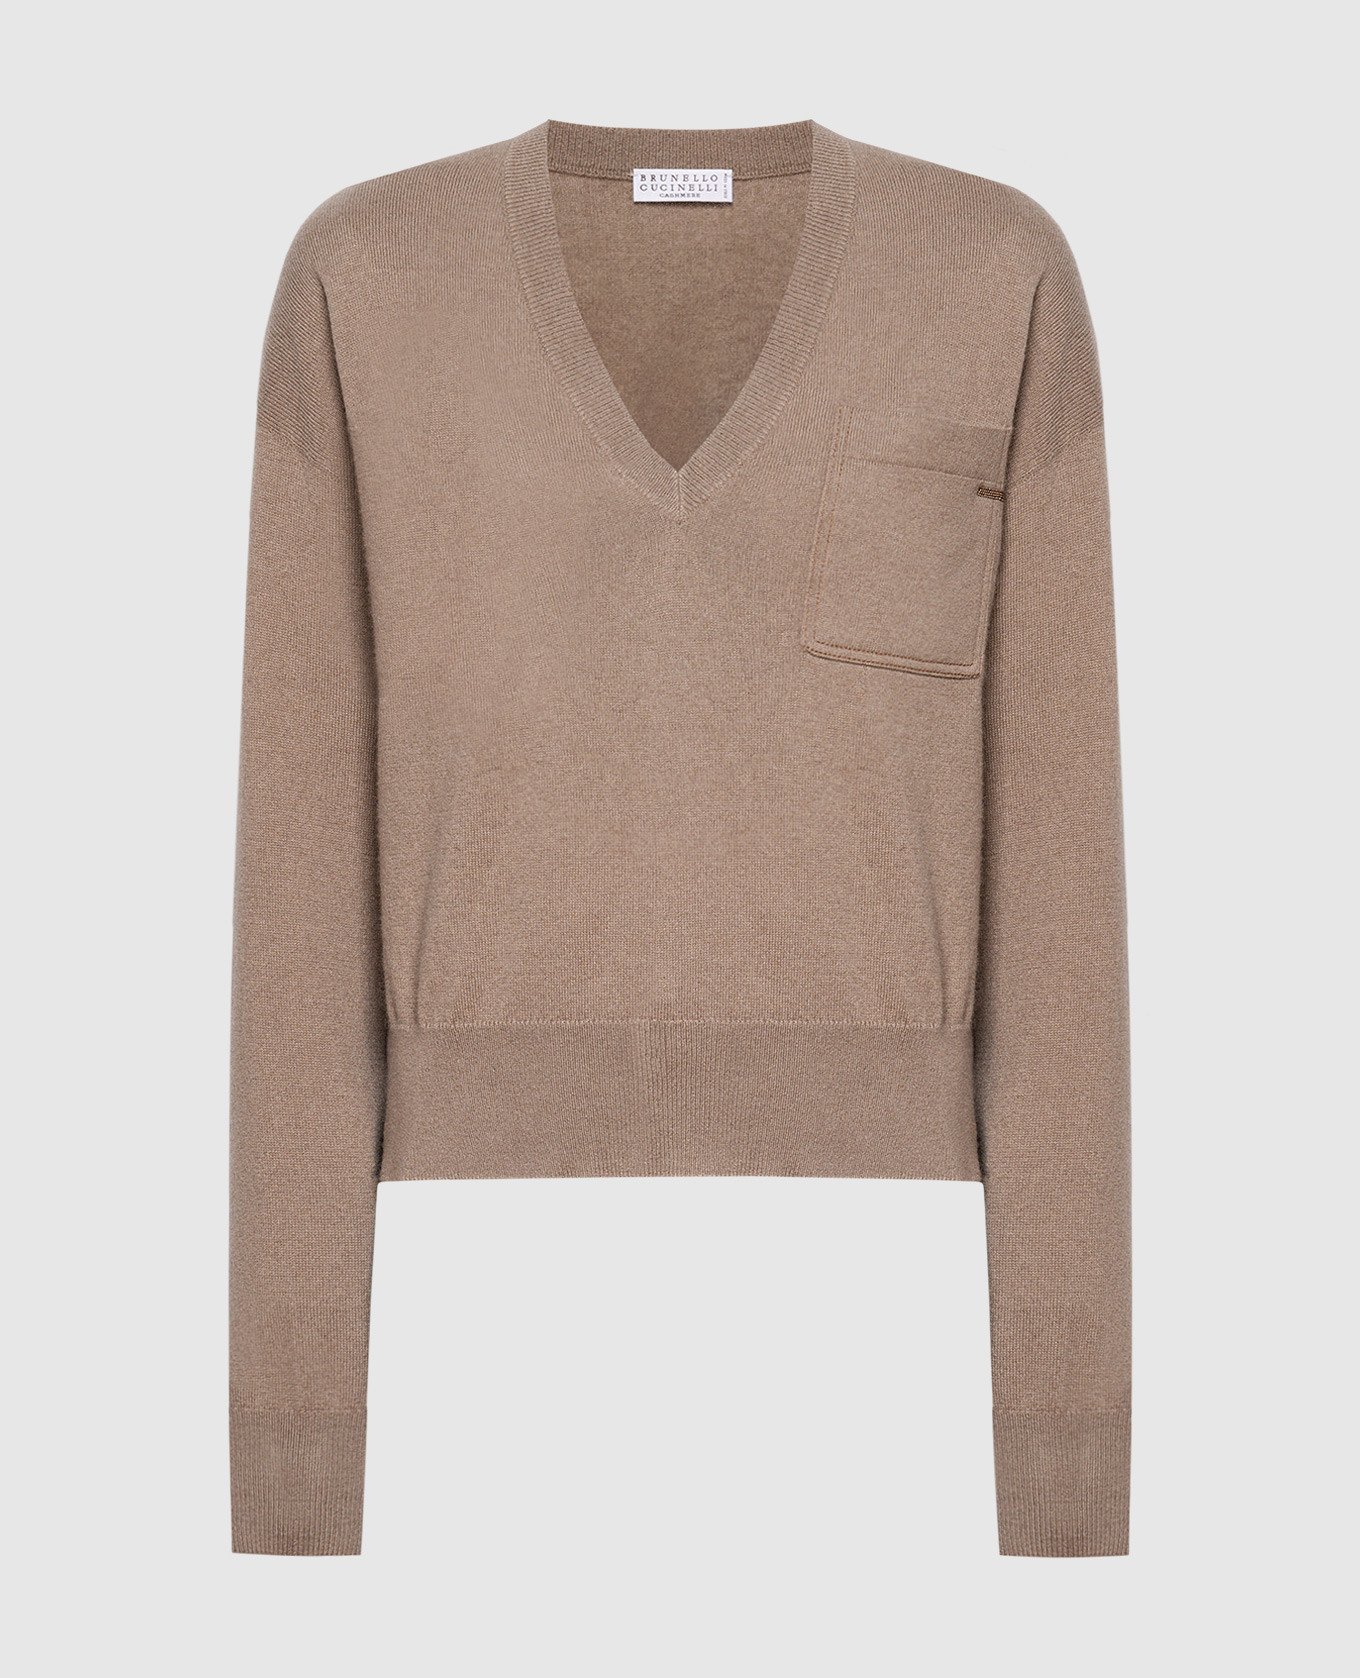 Brown cashmere pullover with monil chain